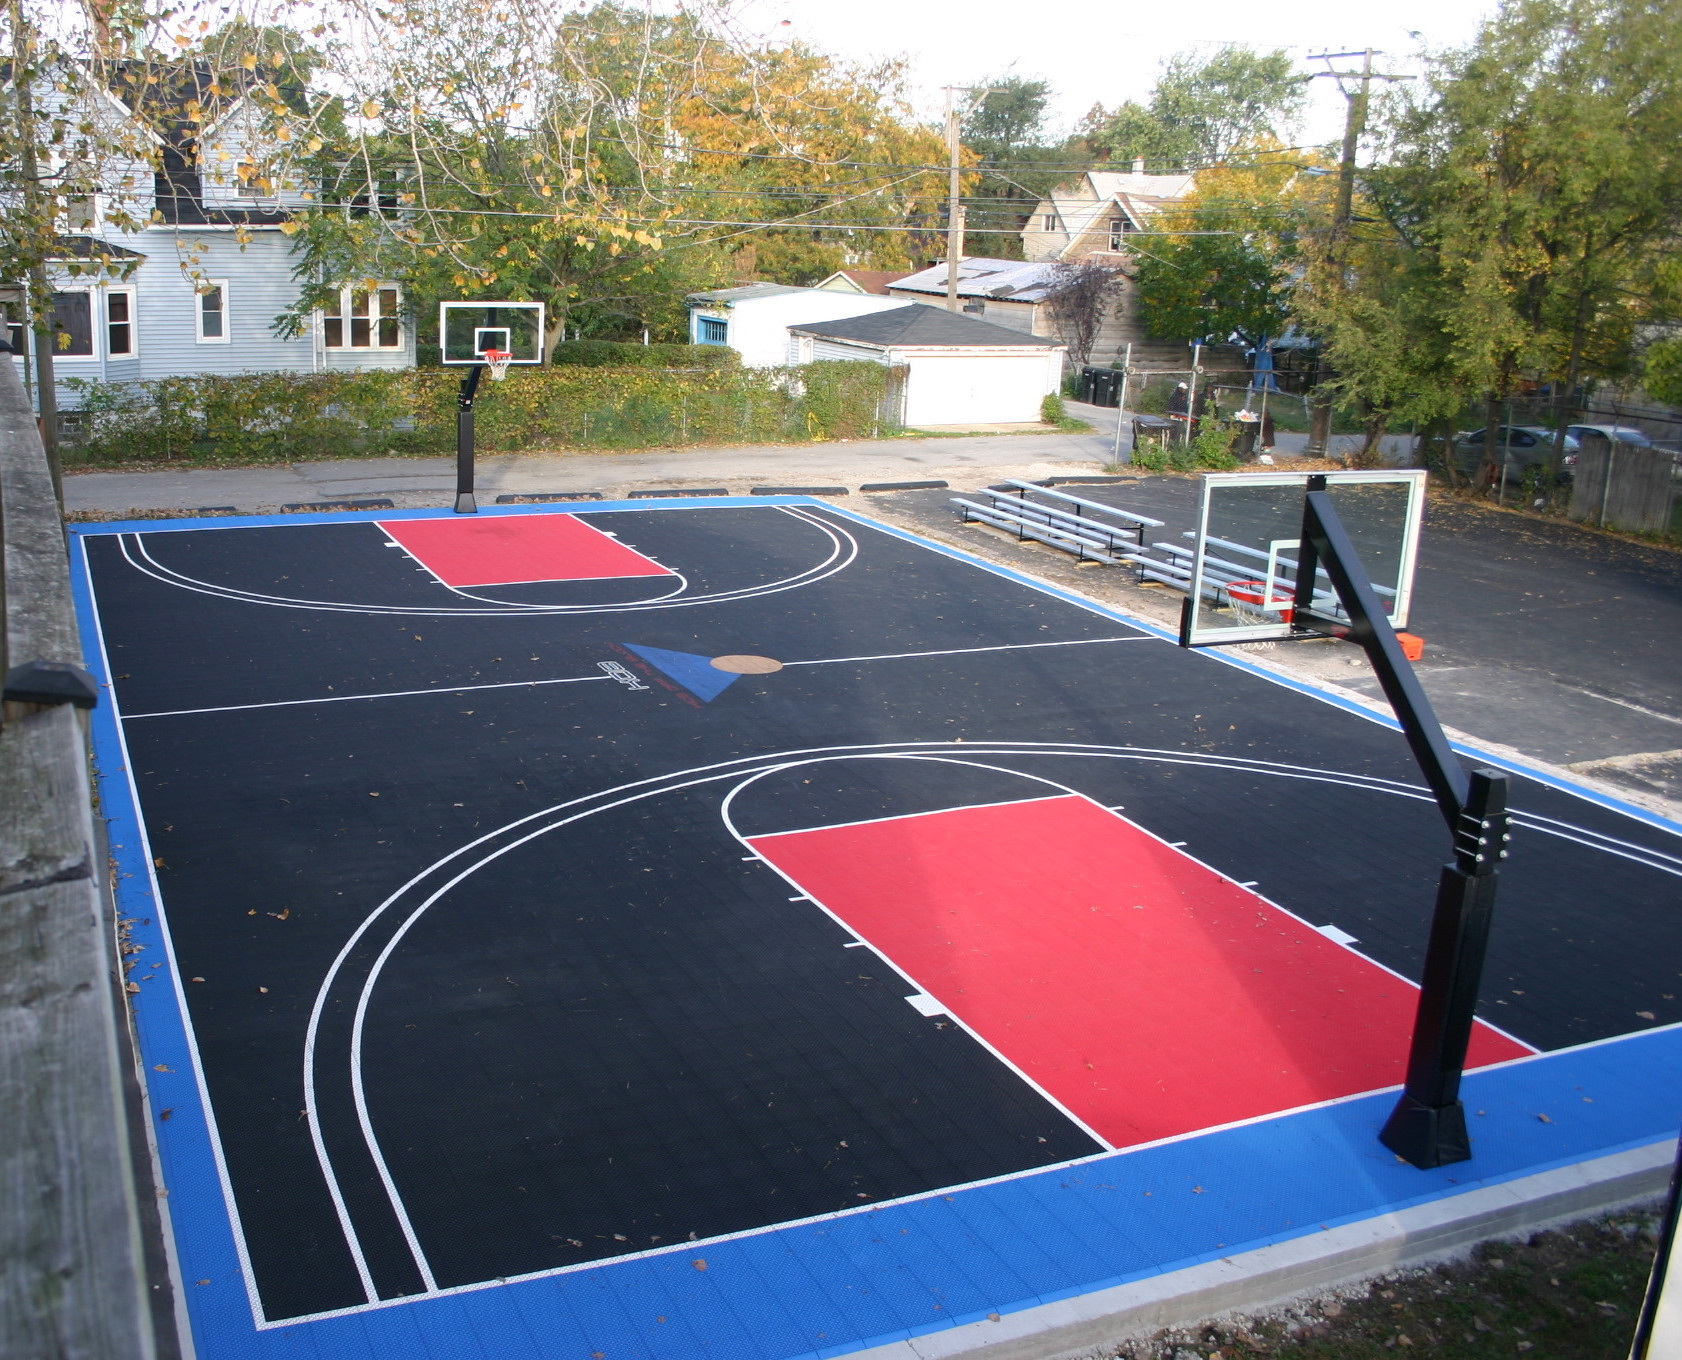 Backyard Basketball Courts Cost
 REAL ESTATE BREHS how much would it cost to build an